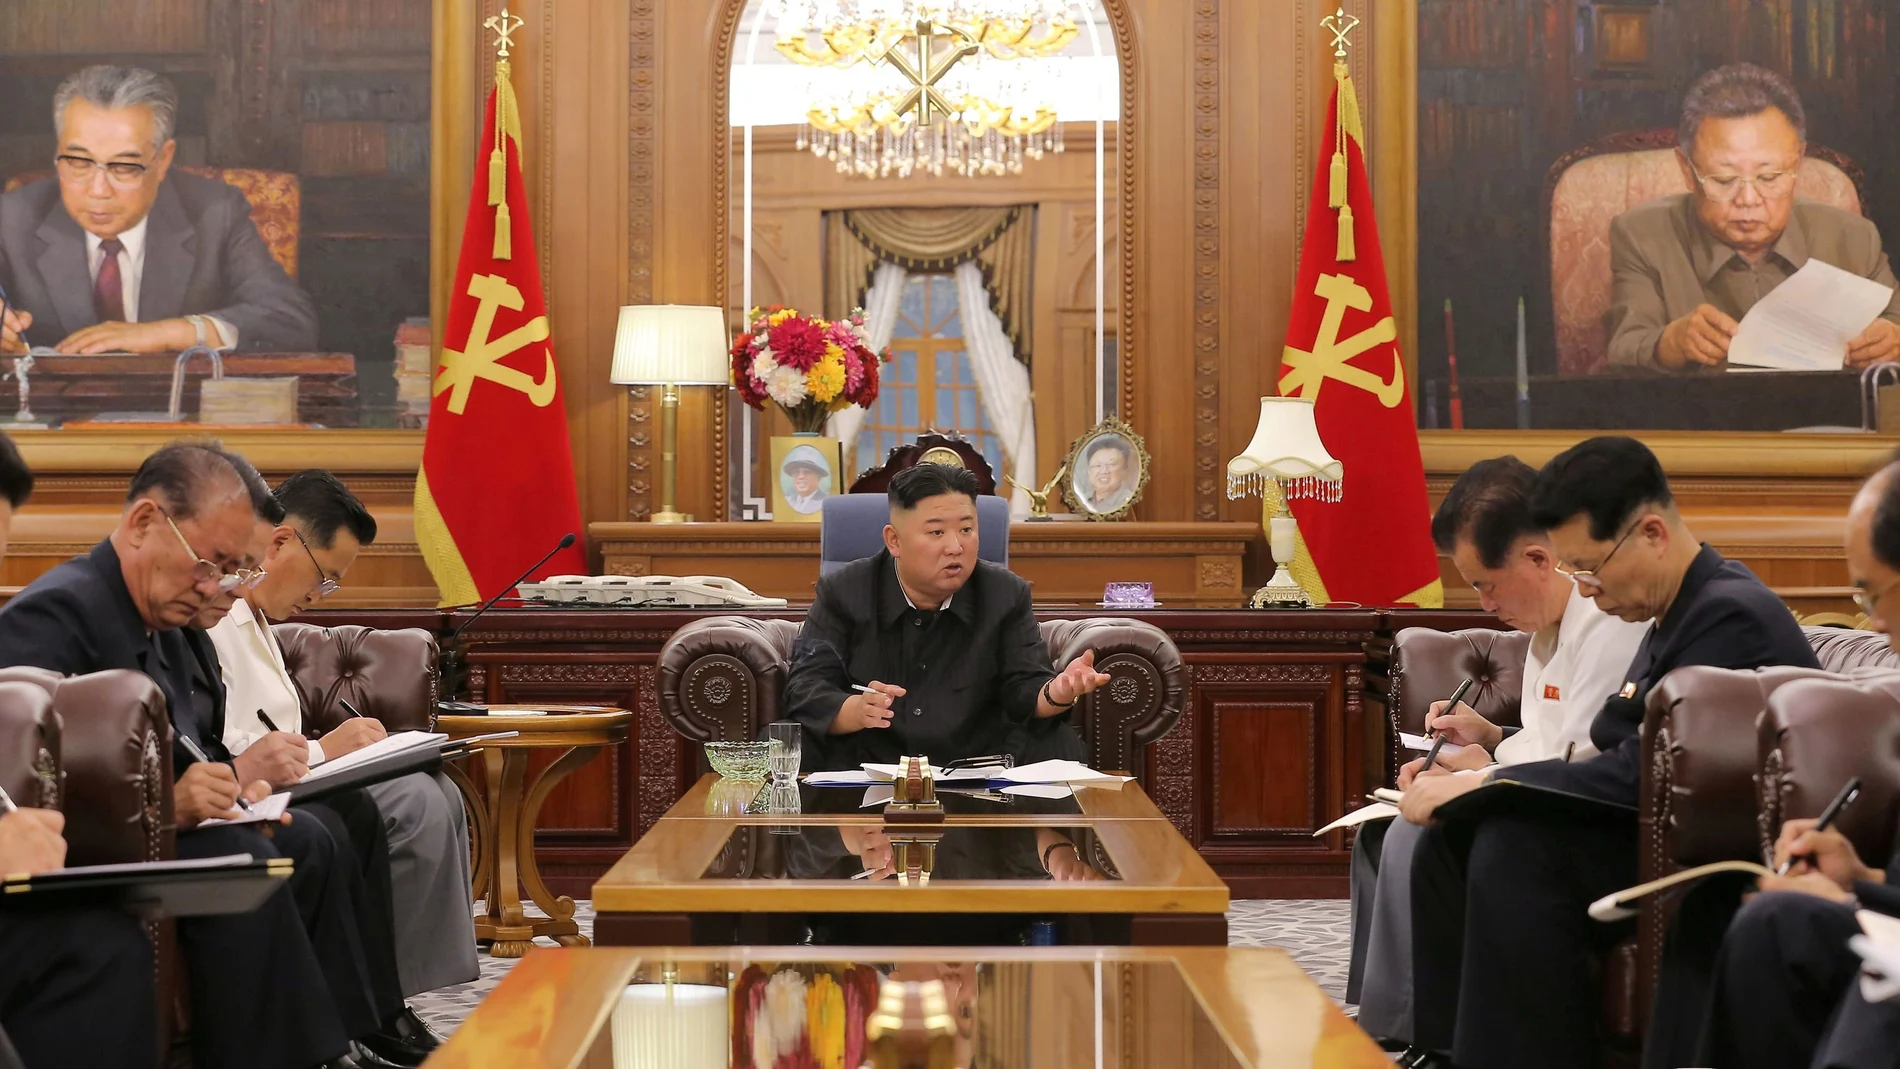 North Korean leader Kim Jong Un at a meeting with senior officials from the Workers' Party of Korea (WPK) Central Committee and Provincial Party Committees in Pyongyang, North Korea, in this undated photo released on June 8, 2021 by North Korea's Korean Central News Agency (KCNA). KCNA/via REUTERS. ATTENTION EDITORS - THIS IMAGE WAS PROVIDED BY A THIRD PARTY. REUTERS IS UNABLE TO INDEPENDENTLY VERIFY THIS IMAGE. NO THIRD PARTY SALES. SOUTH KOREA OUT. TPX IMAGES OF THE DAY